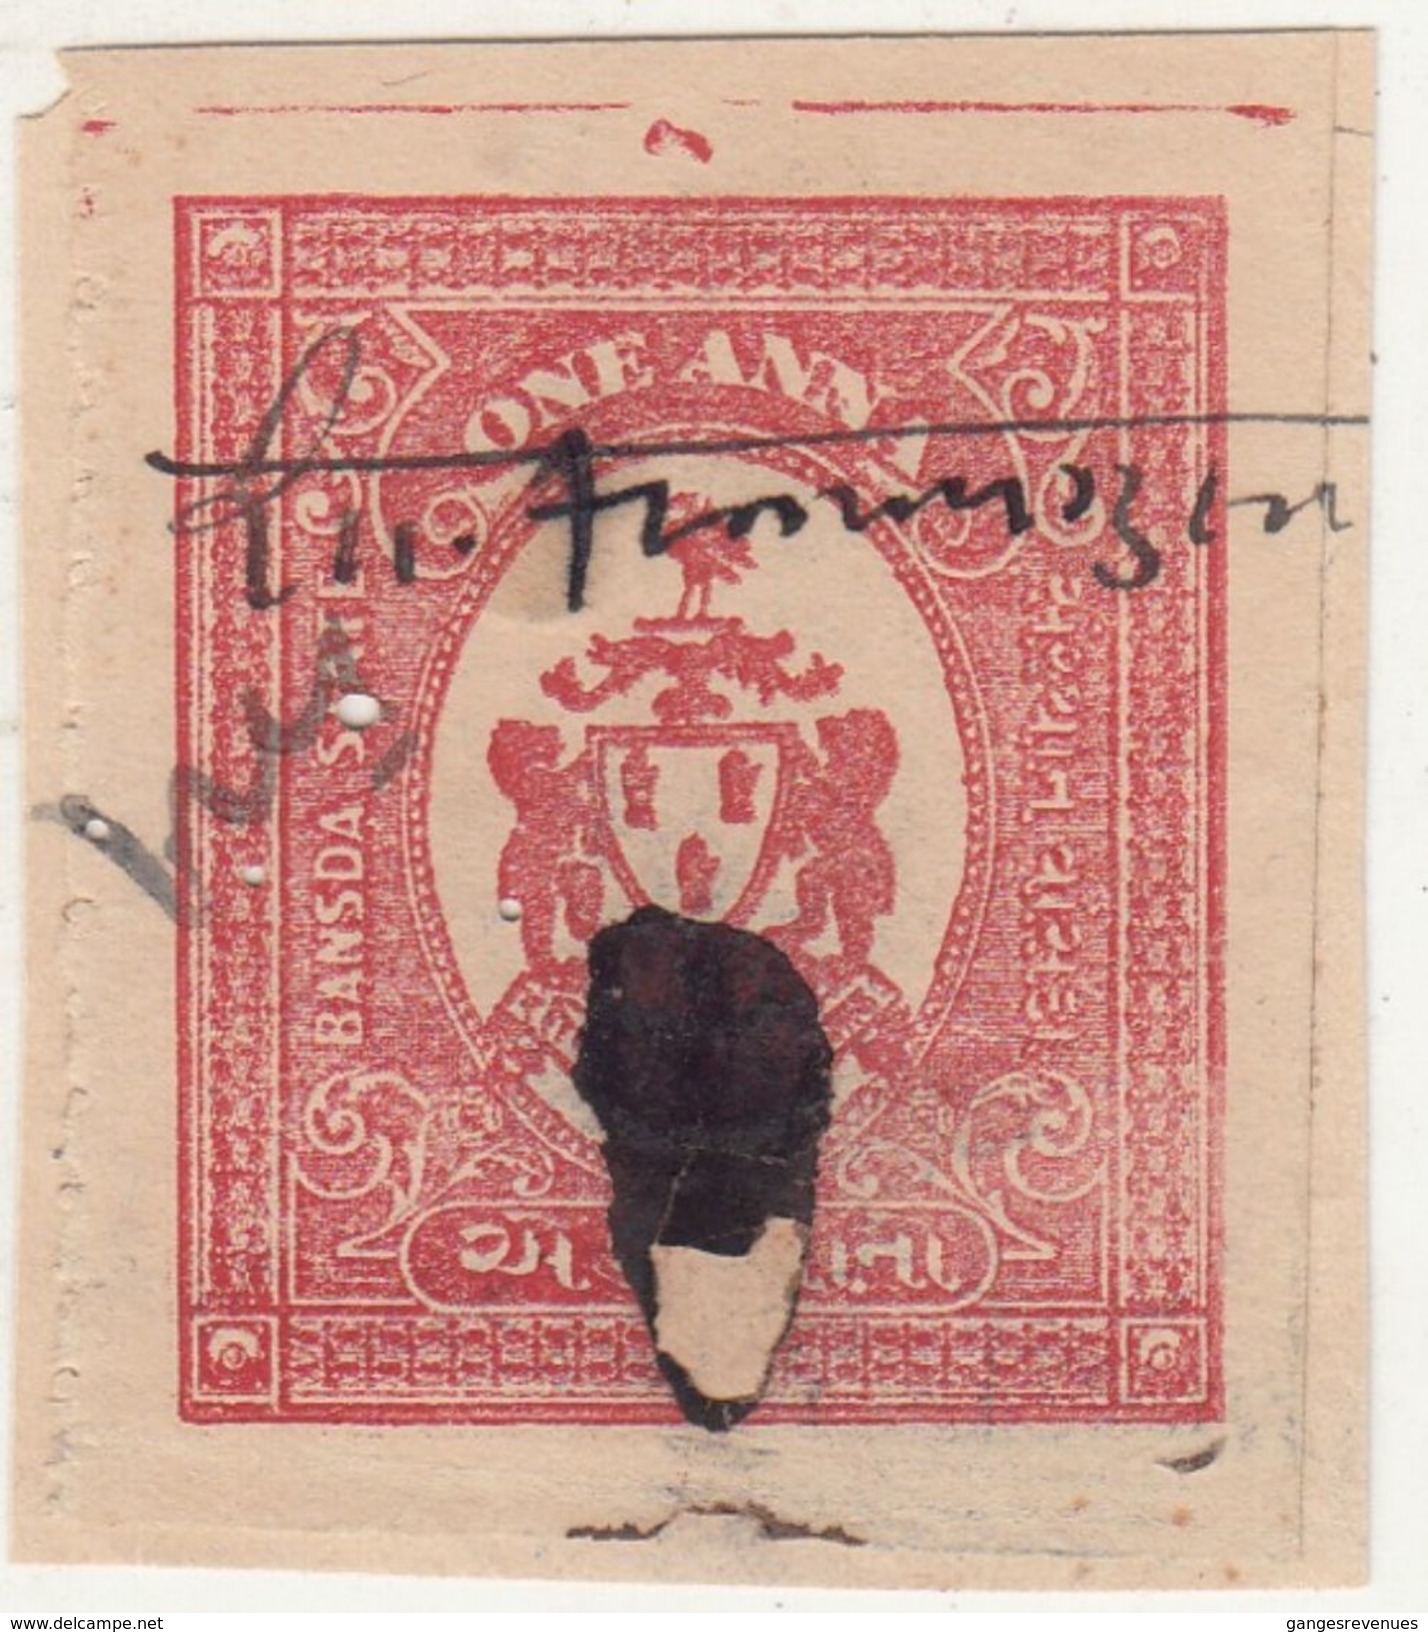 BANSDA  State  1A  Imperf  Dull Scalet  Revenue Type 30   #  97864  Inde Indien  India Fiscaux Fiscal Revenue - Charkhari